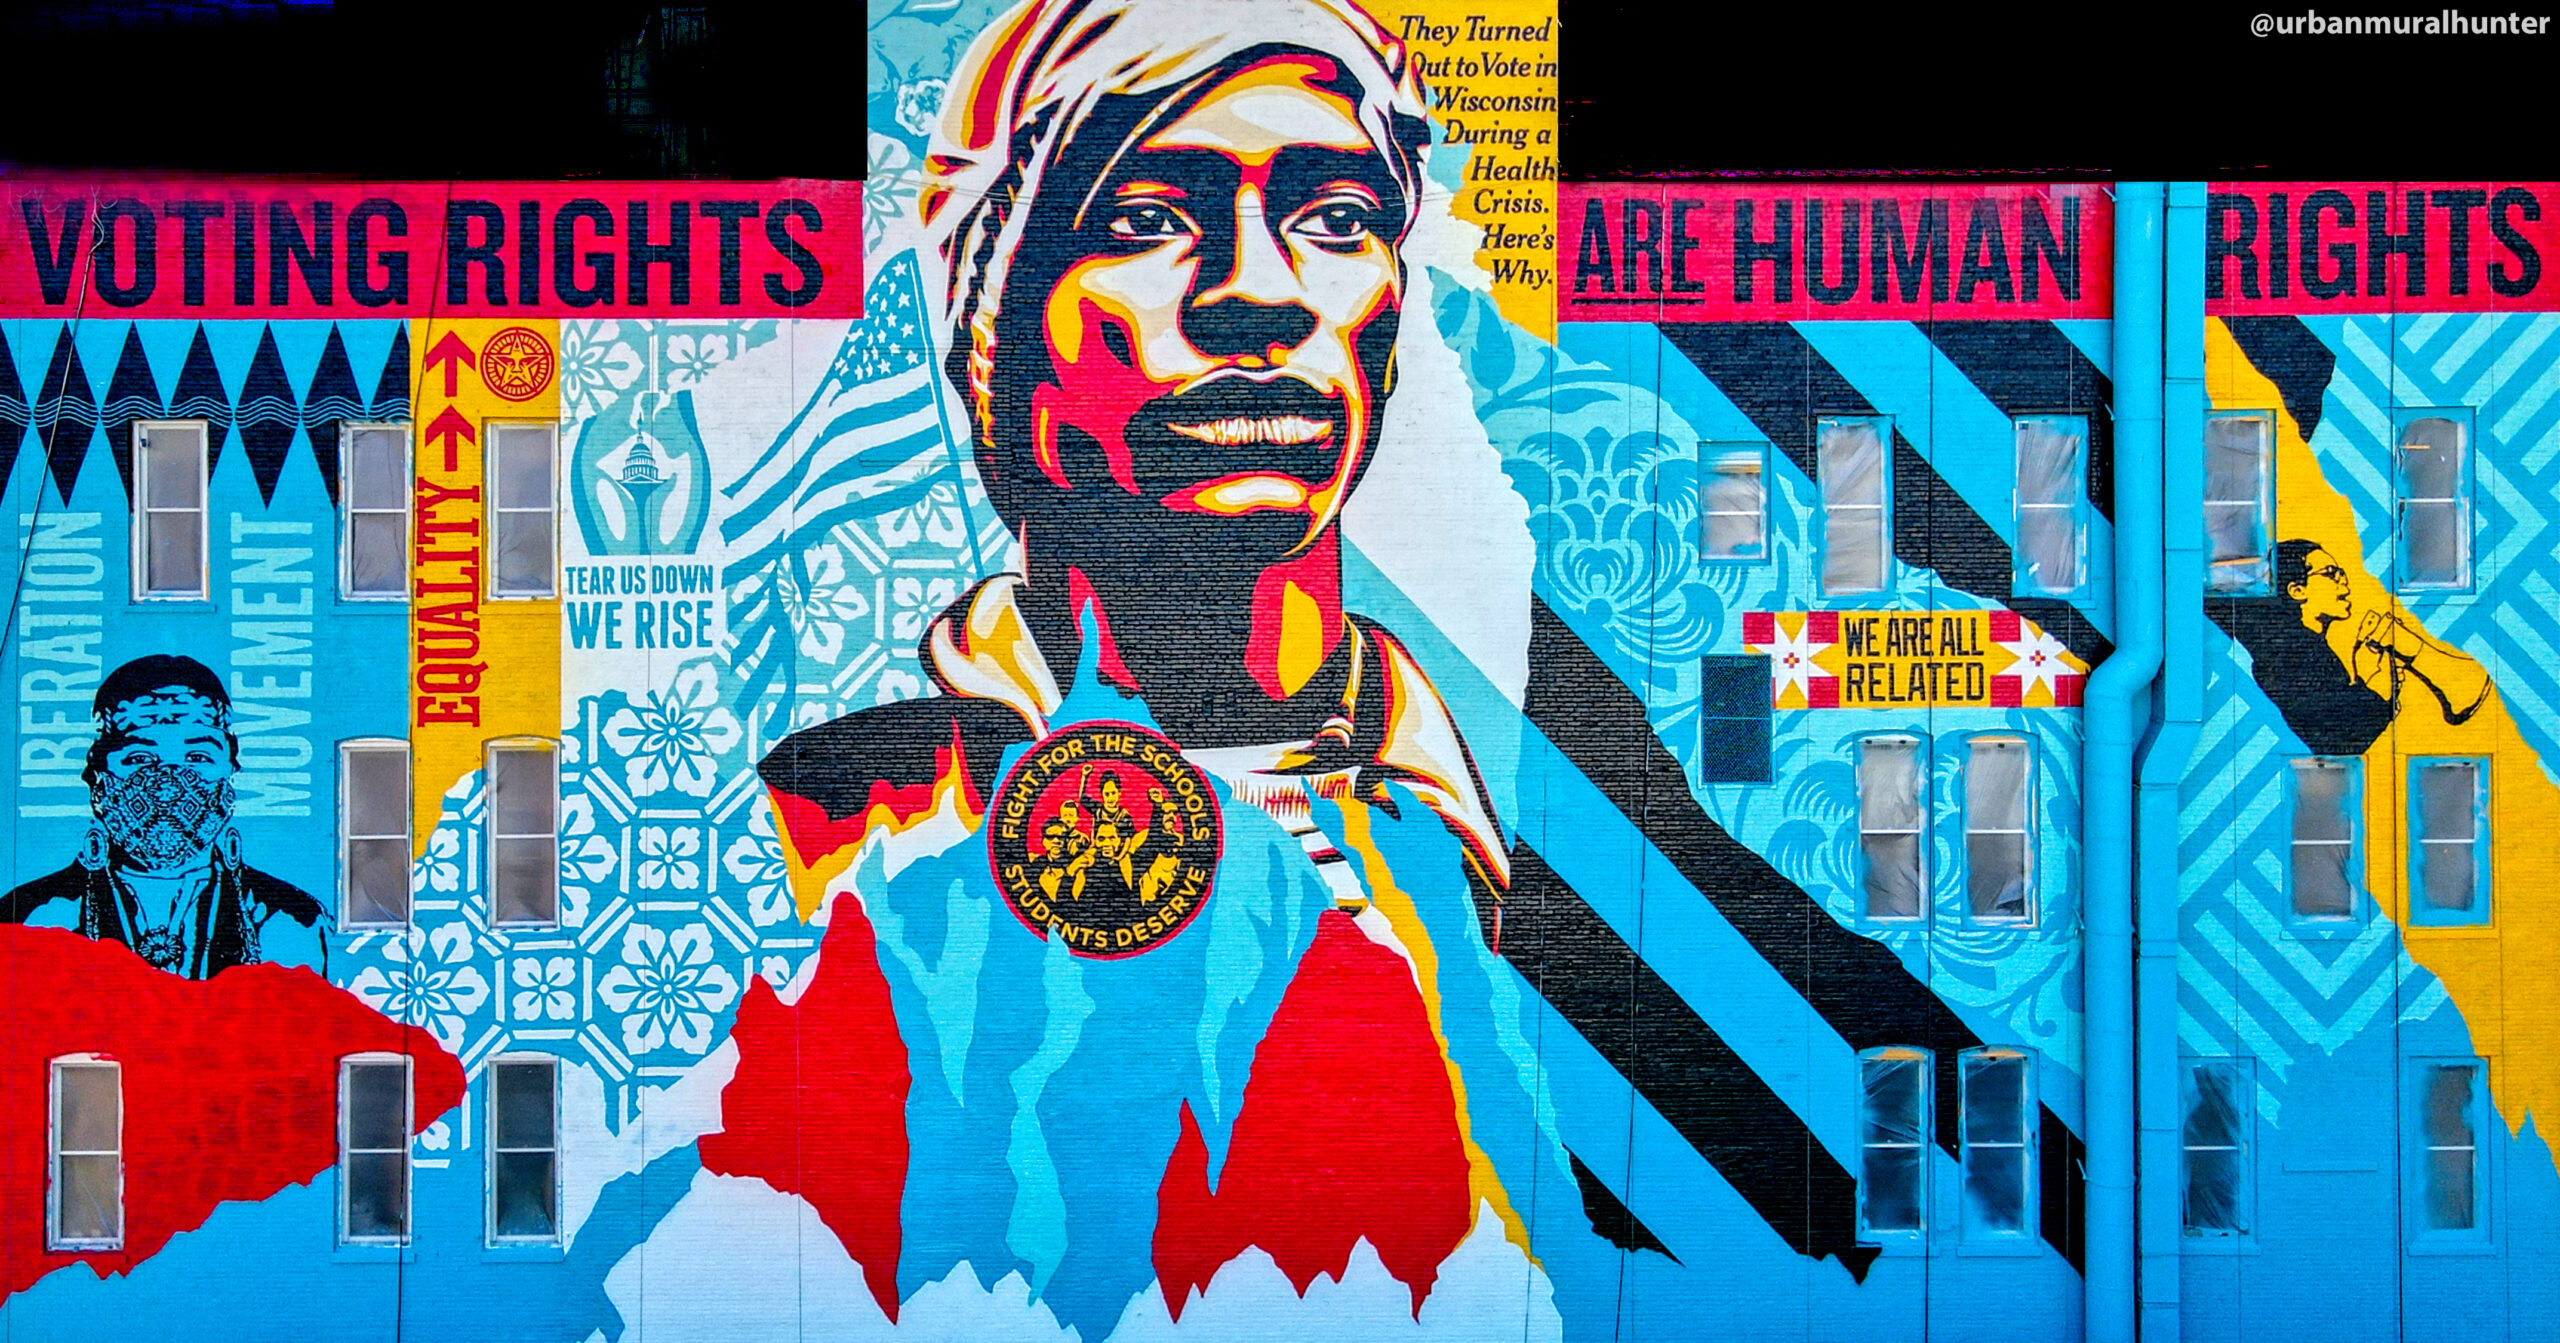 Voting rights are human rights mural